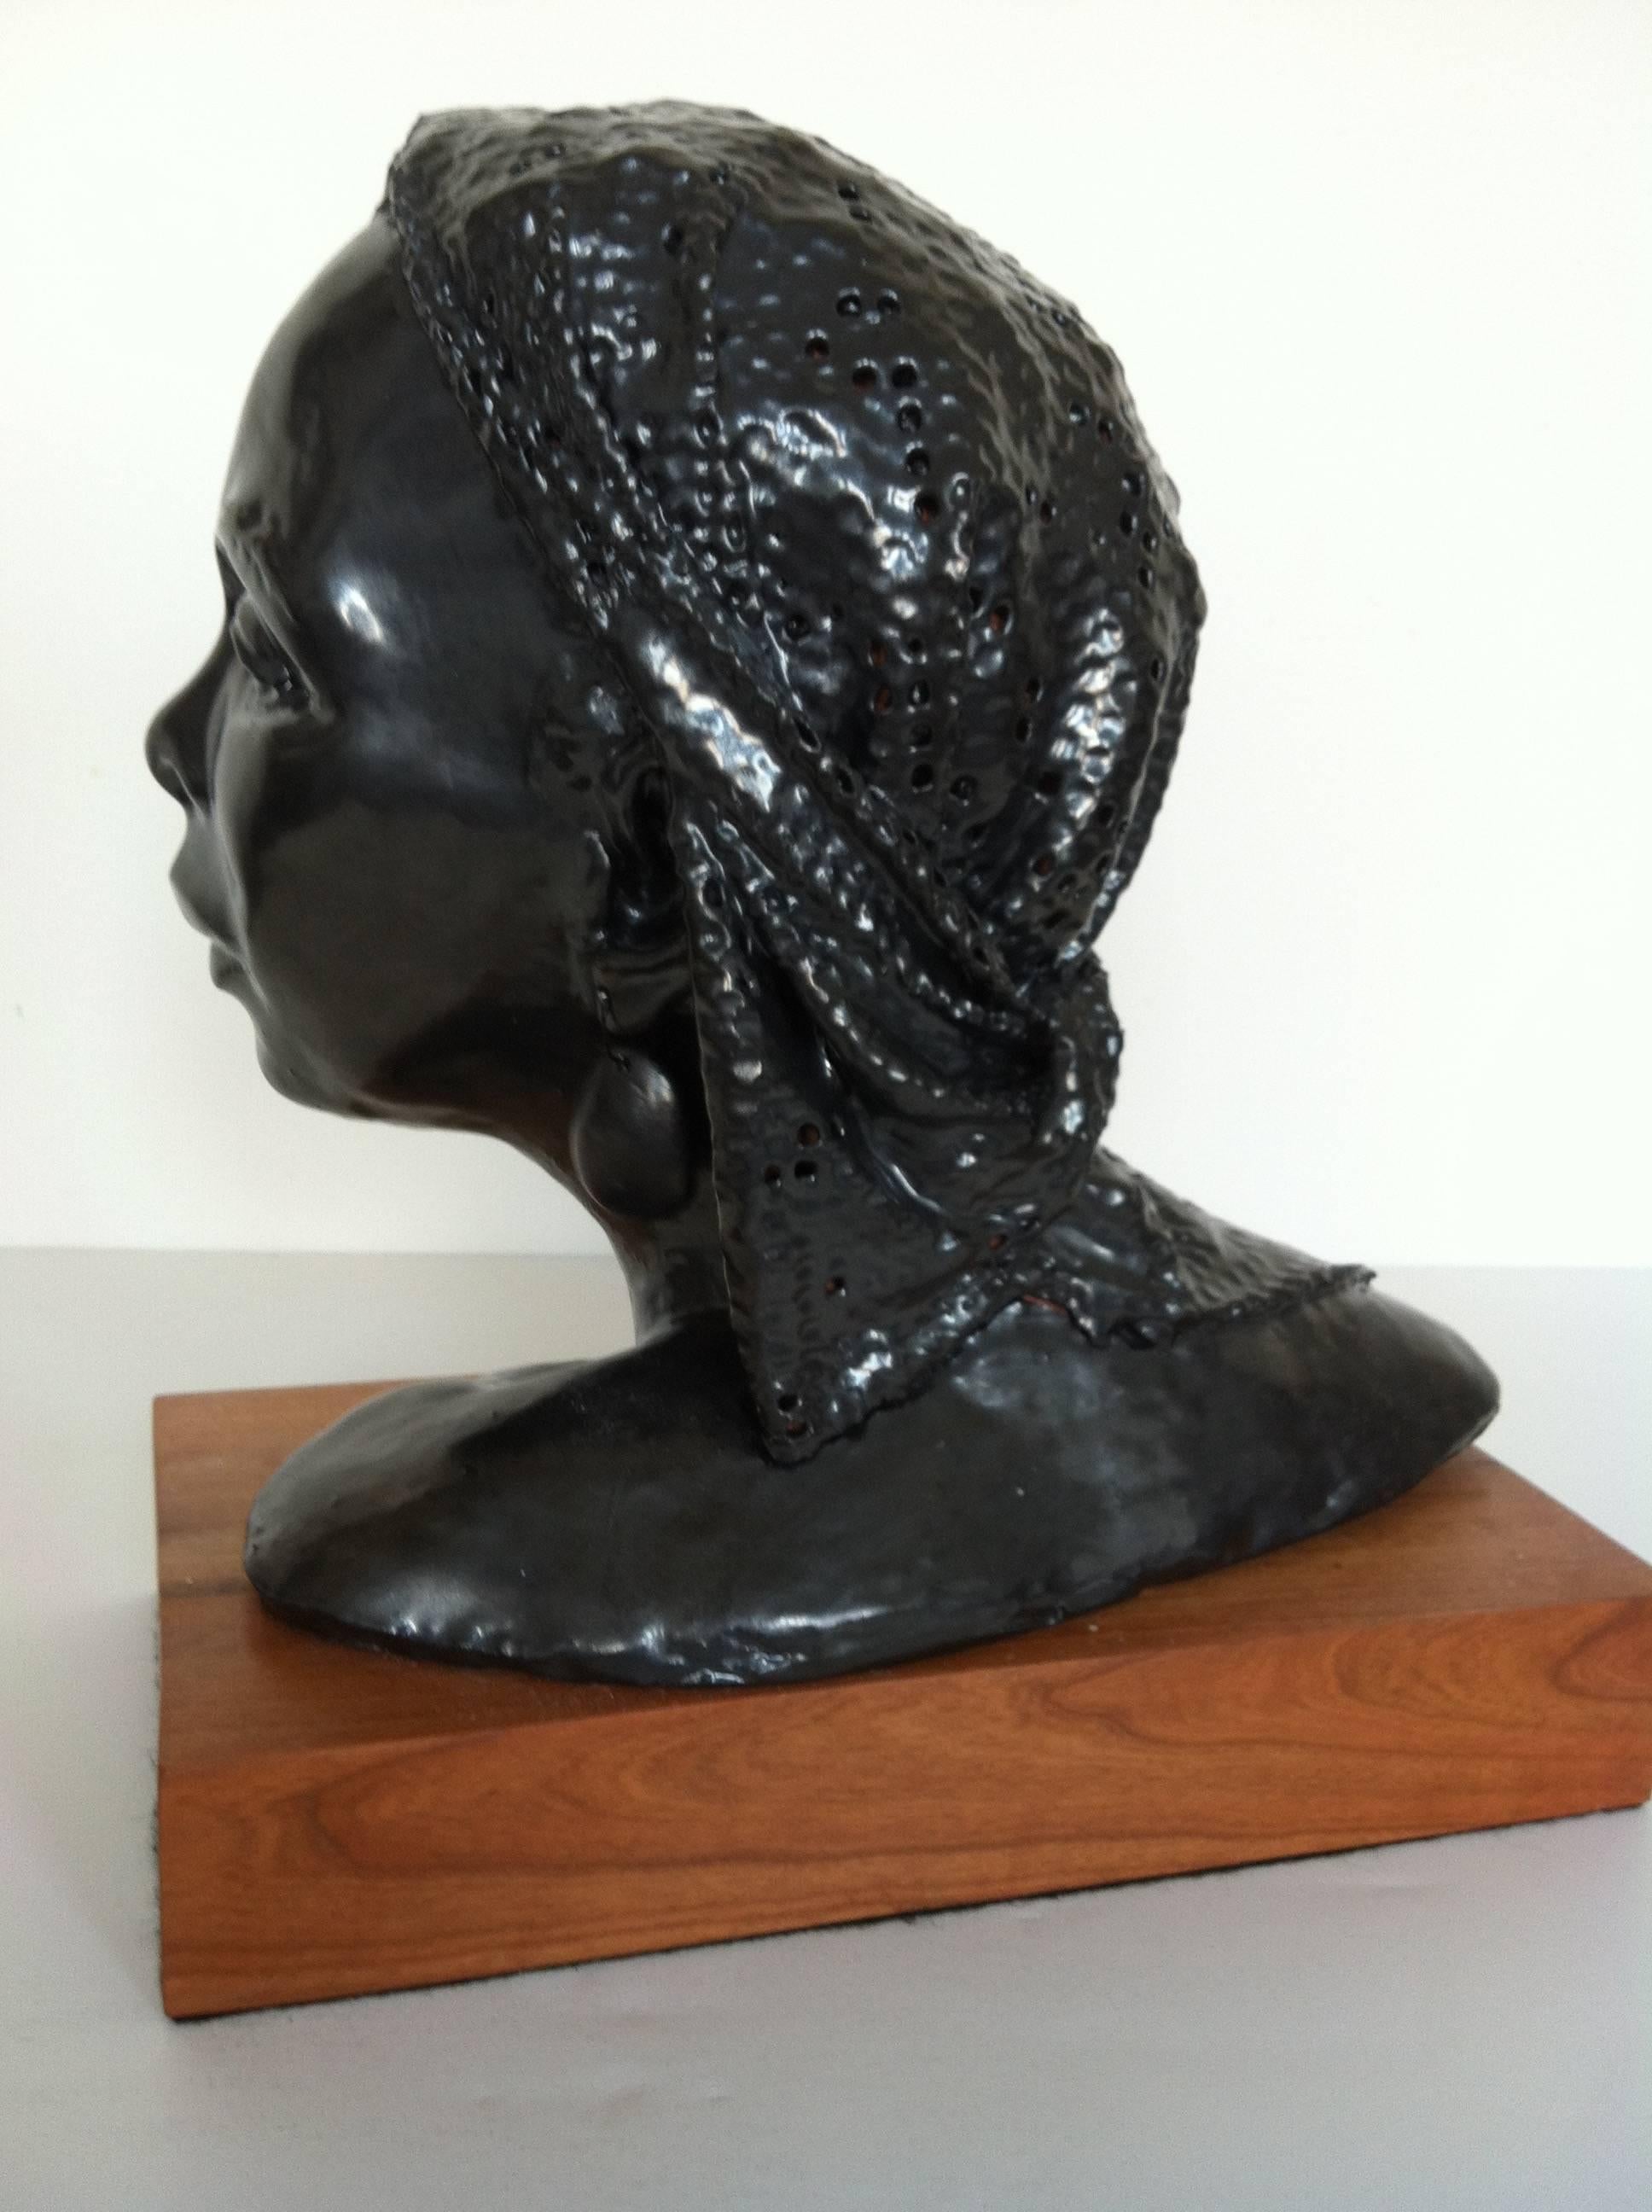 Nina Simone's Portrait - Contemporary Sculpture by Terry Rooney